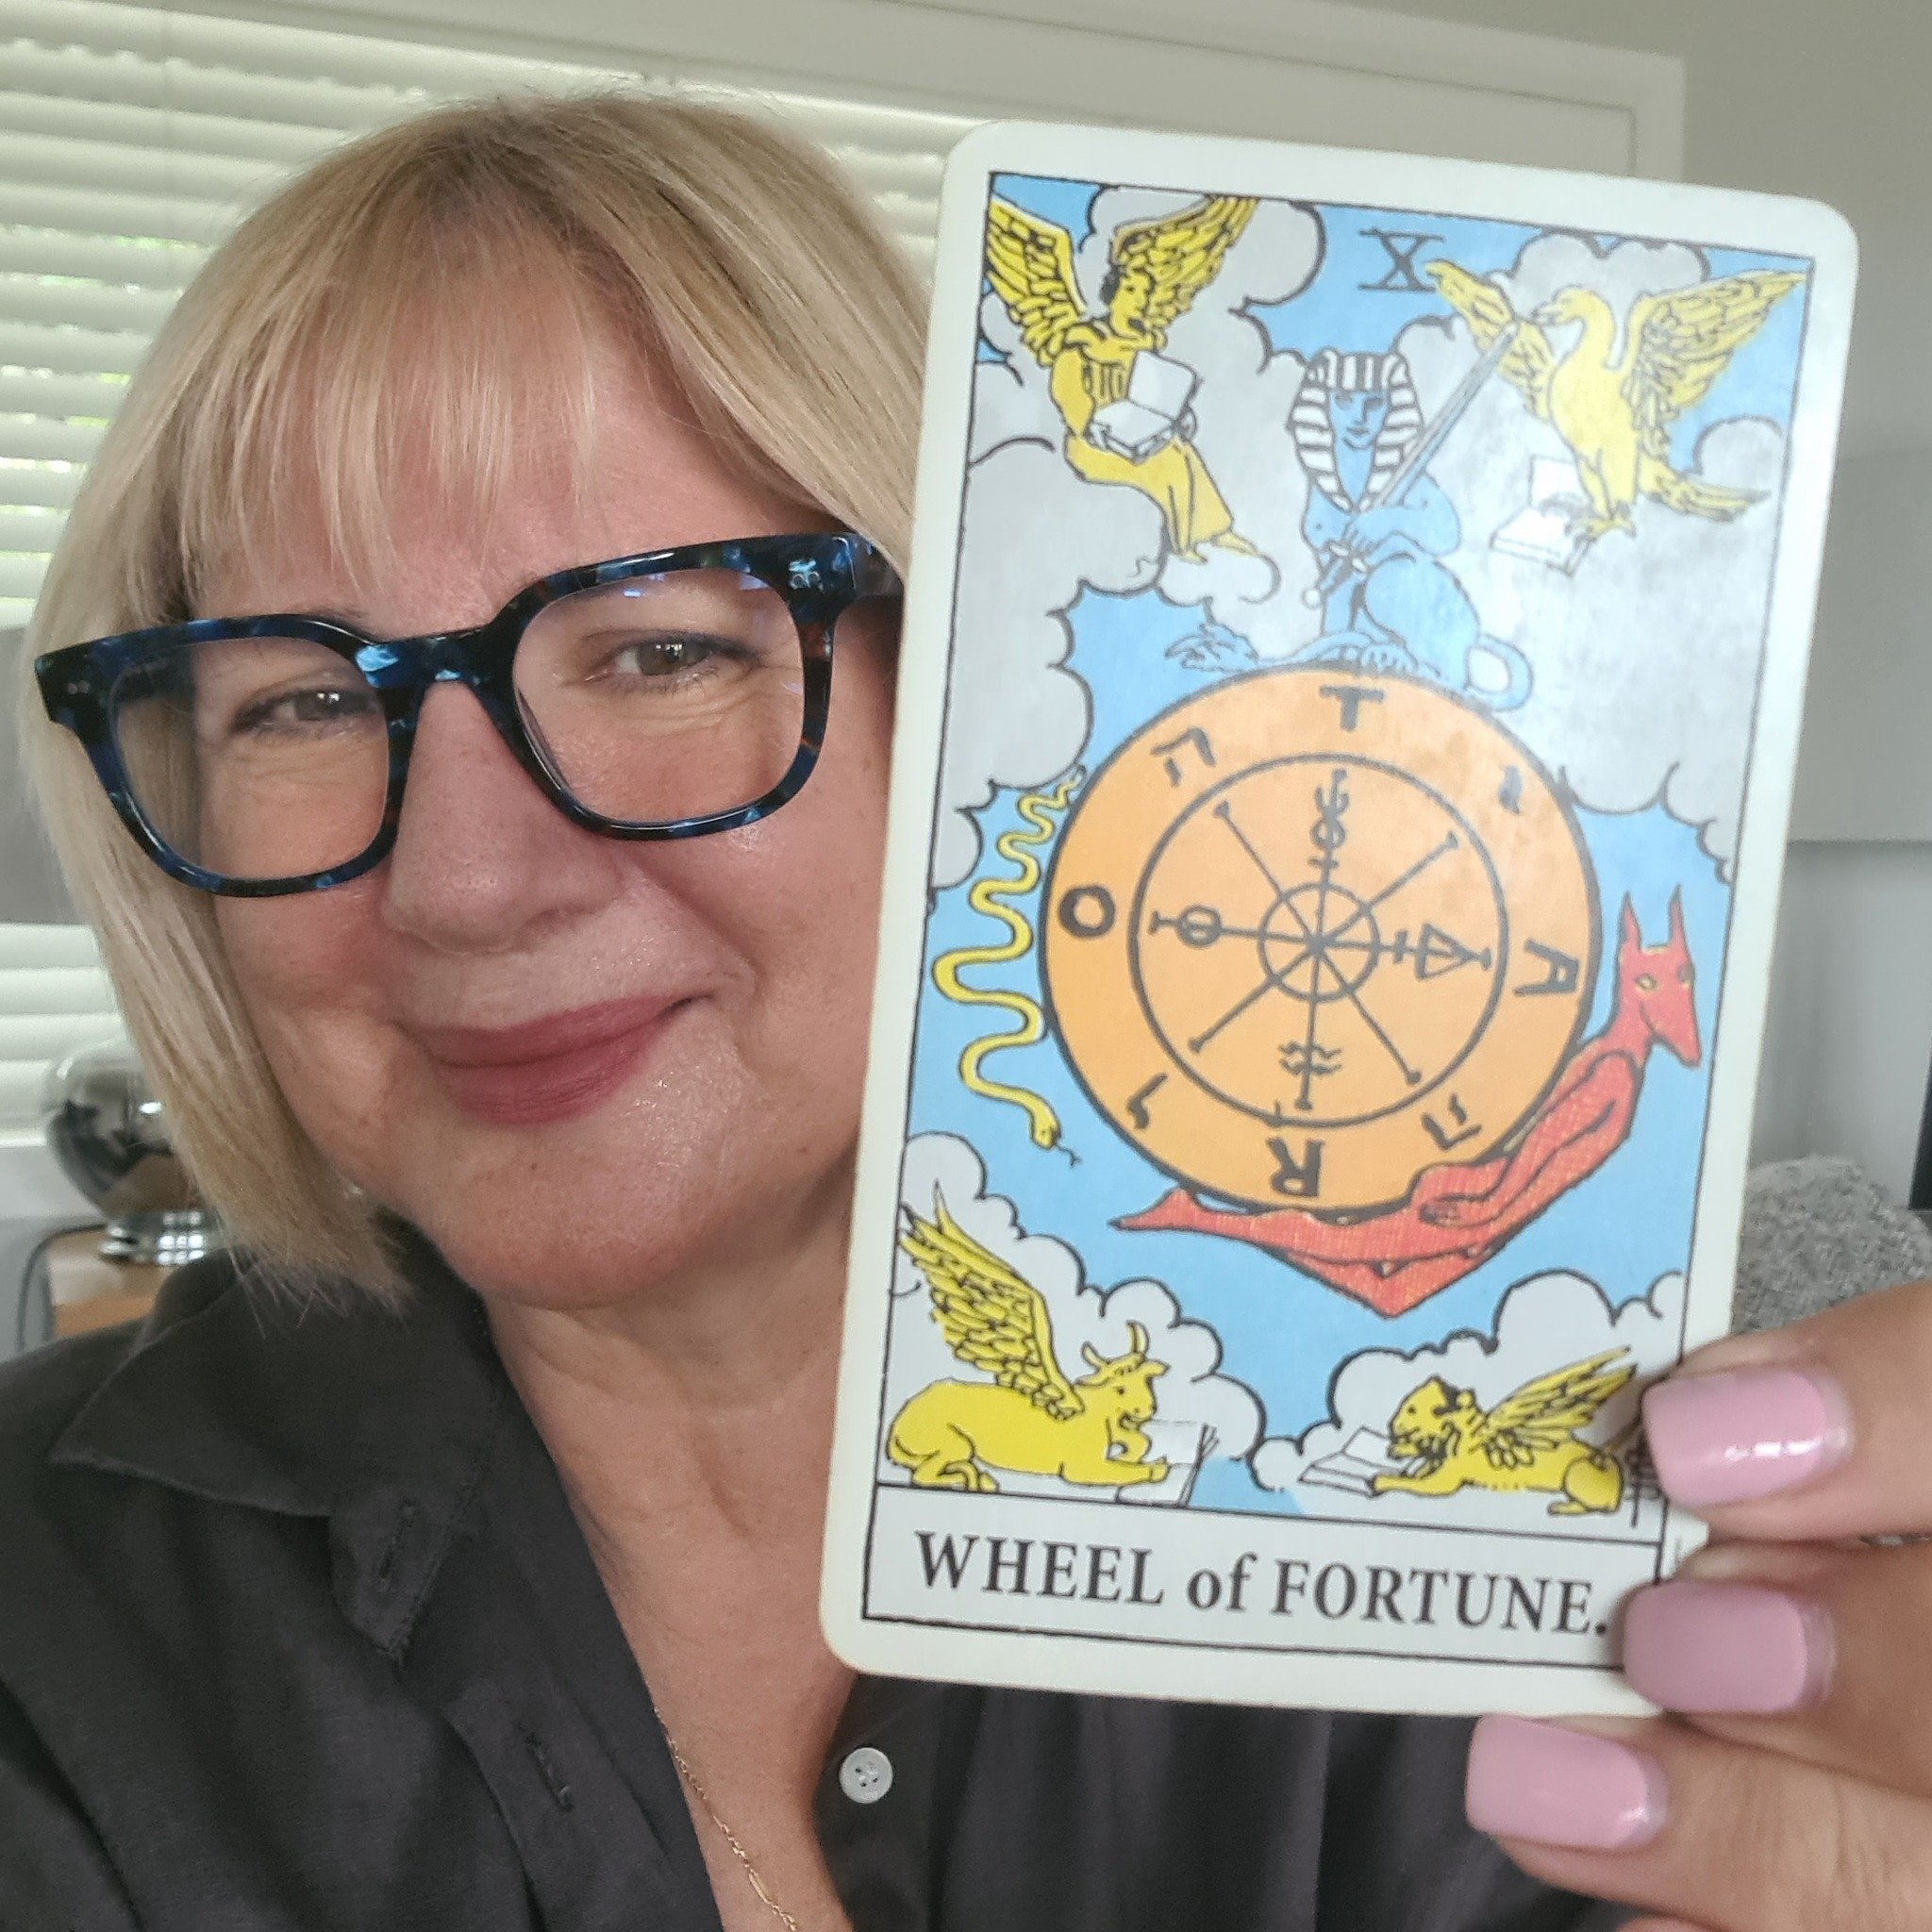 Monday Insight 🌊 Card for the day! A turning point, serendipity! The Wheel of Fortune is about embracing change . The lesson of key of 10 is to learn to detach from the outcome. So whether our fortunes go up or down we can look at it with equanimity